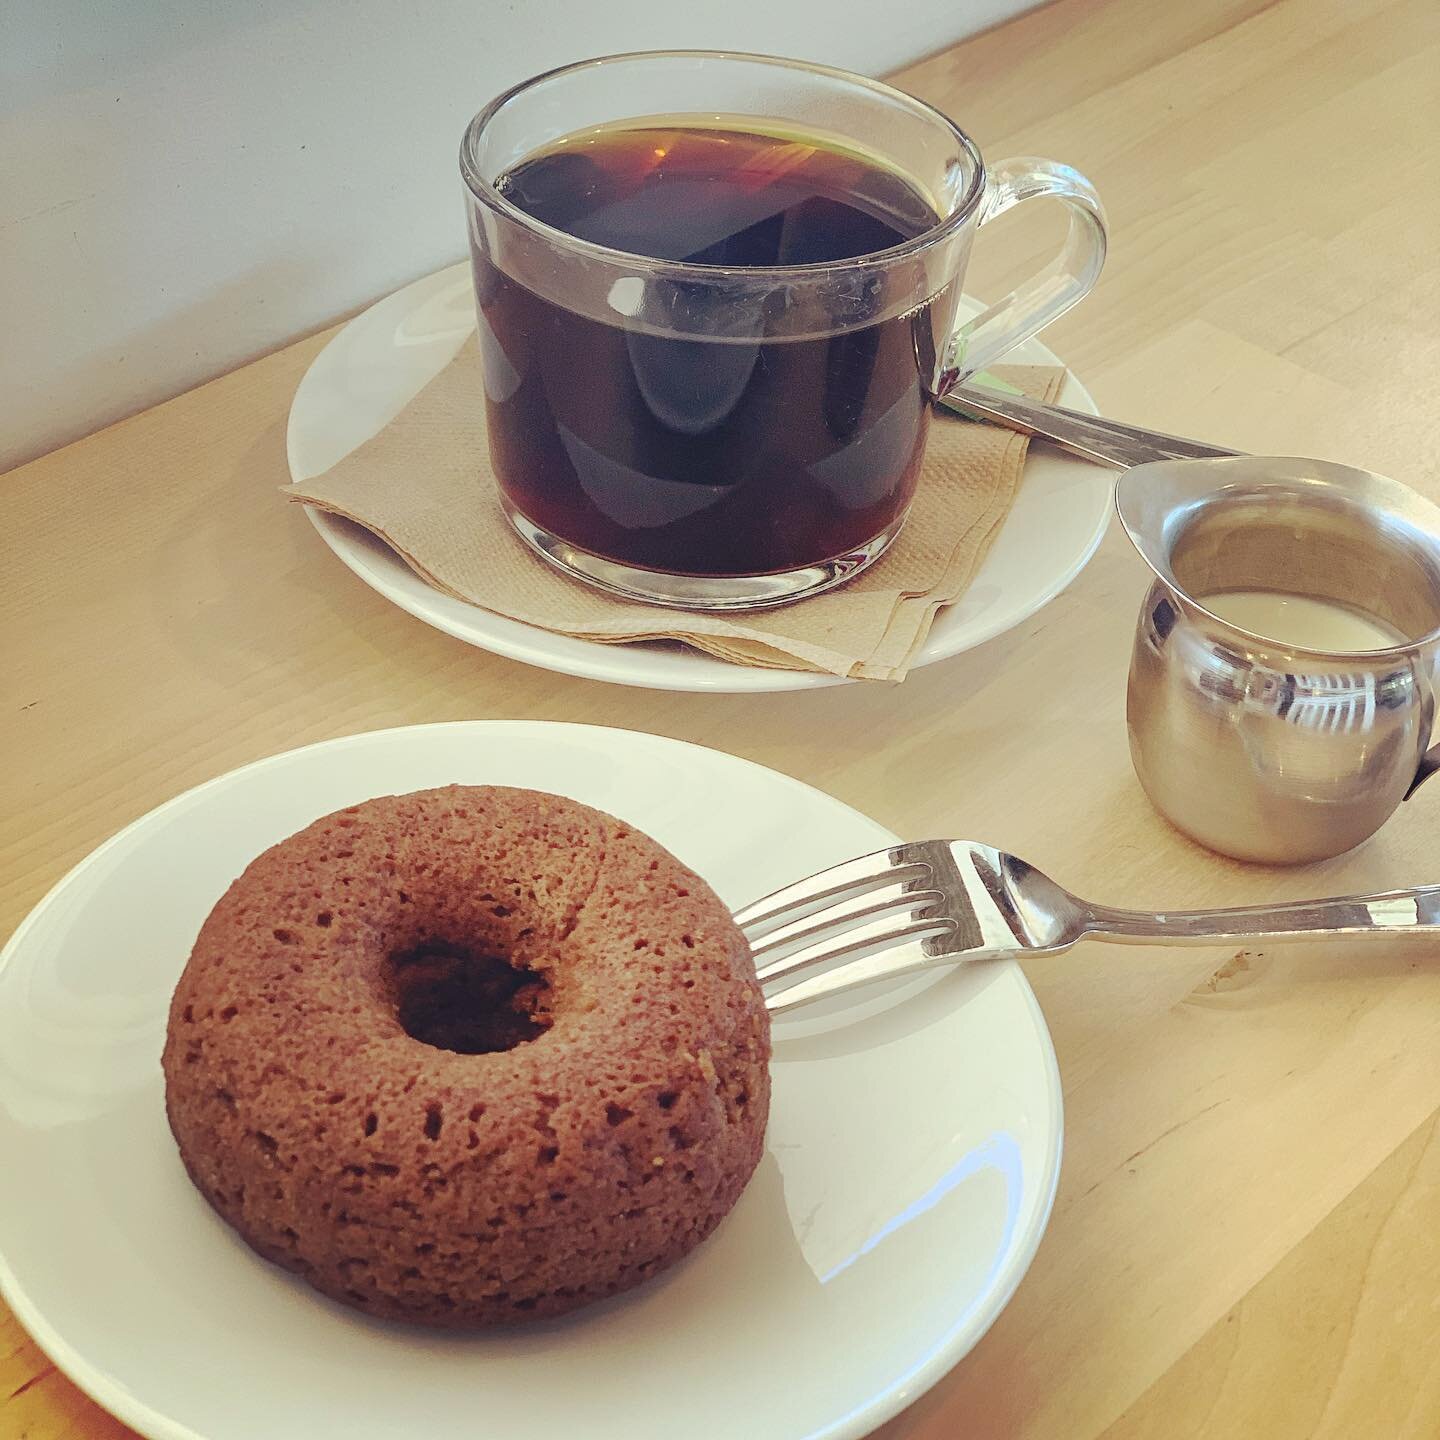 Olivia&rsquo;s Organic Café is very excited to offer this beautiful new keto option! In addition to being Gluten-free and Dairy-free, these babies are Grain-free and Sugar-free!: Donut flavors are Chocolate Raspberry and Cinnamon 🤩 They. Are. So. G